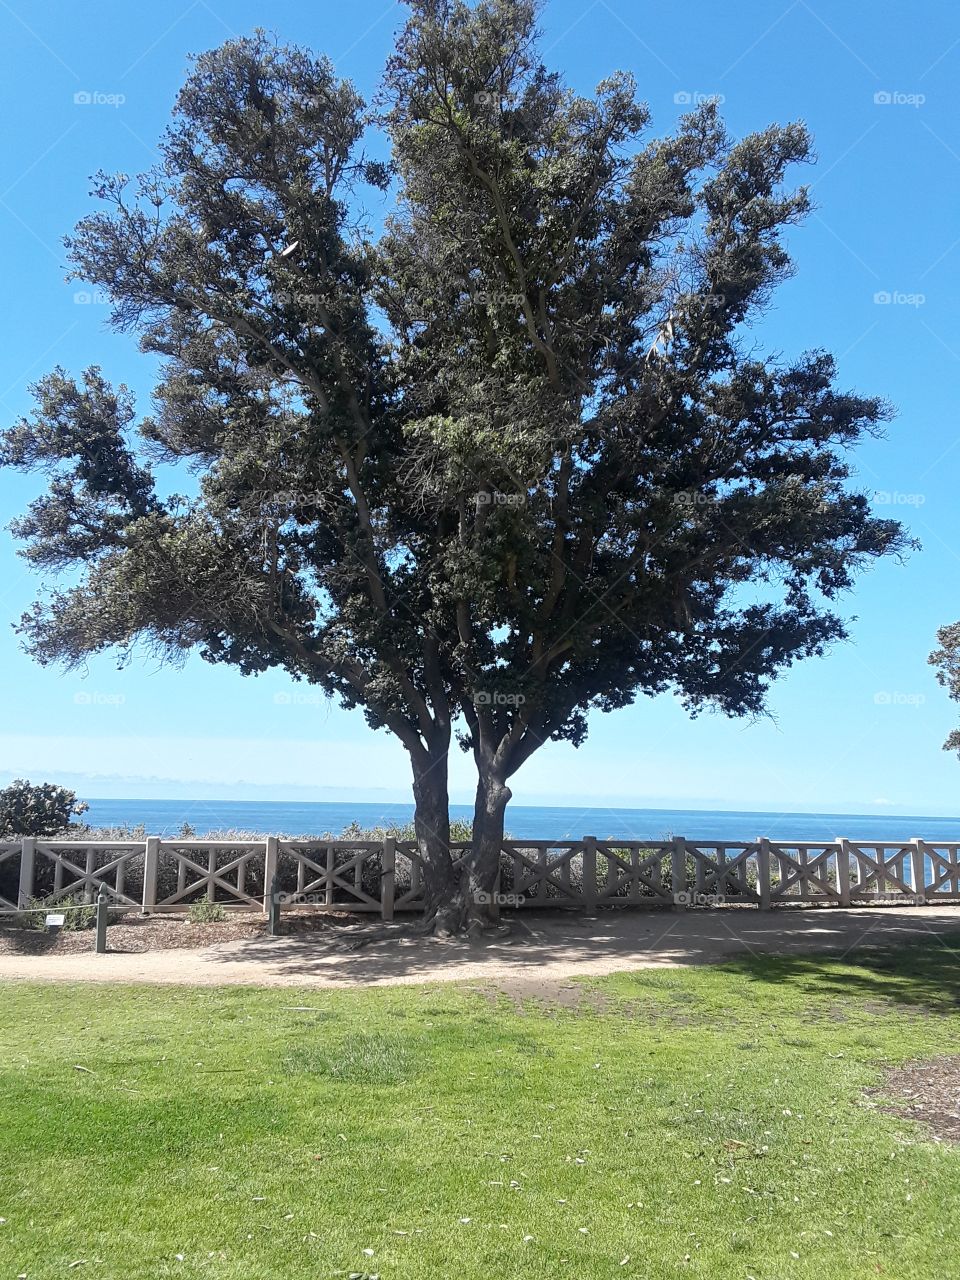 Tree of life in the beach